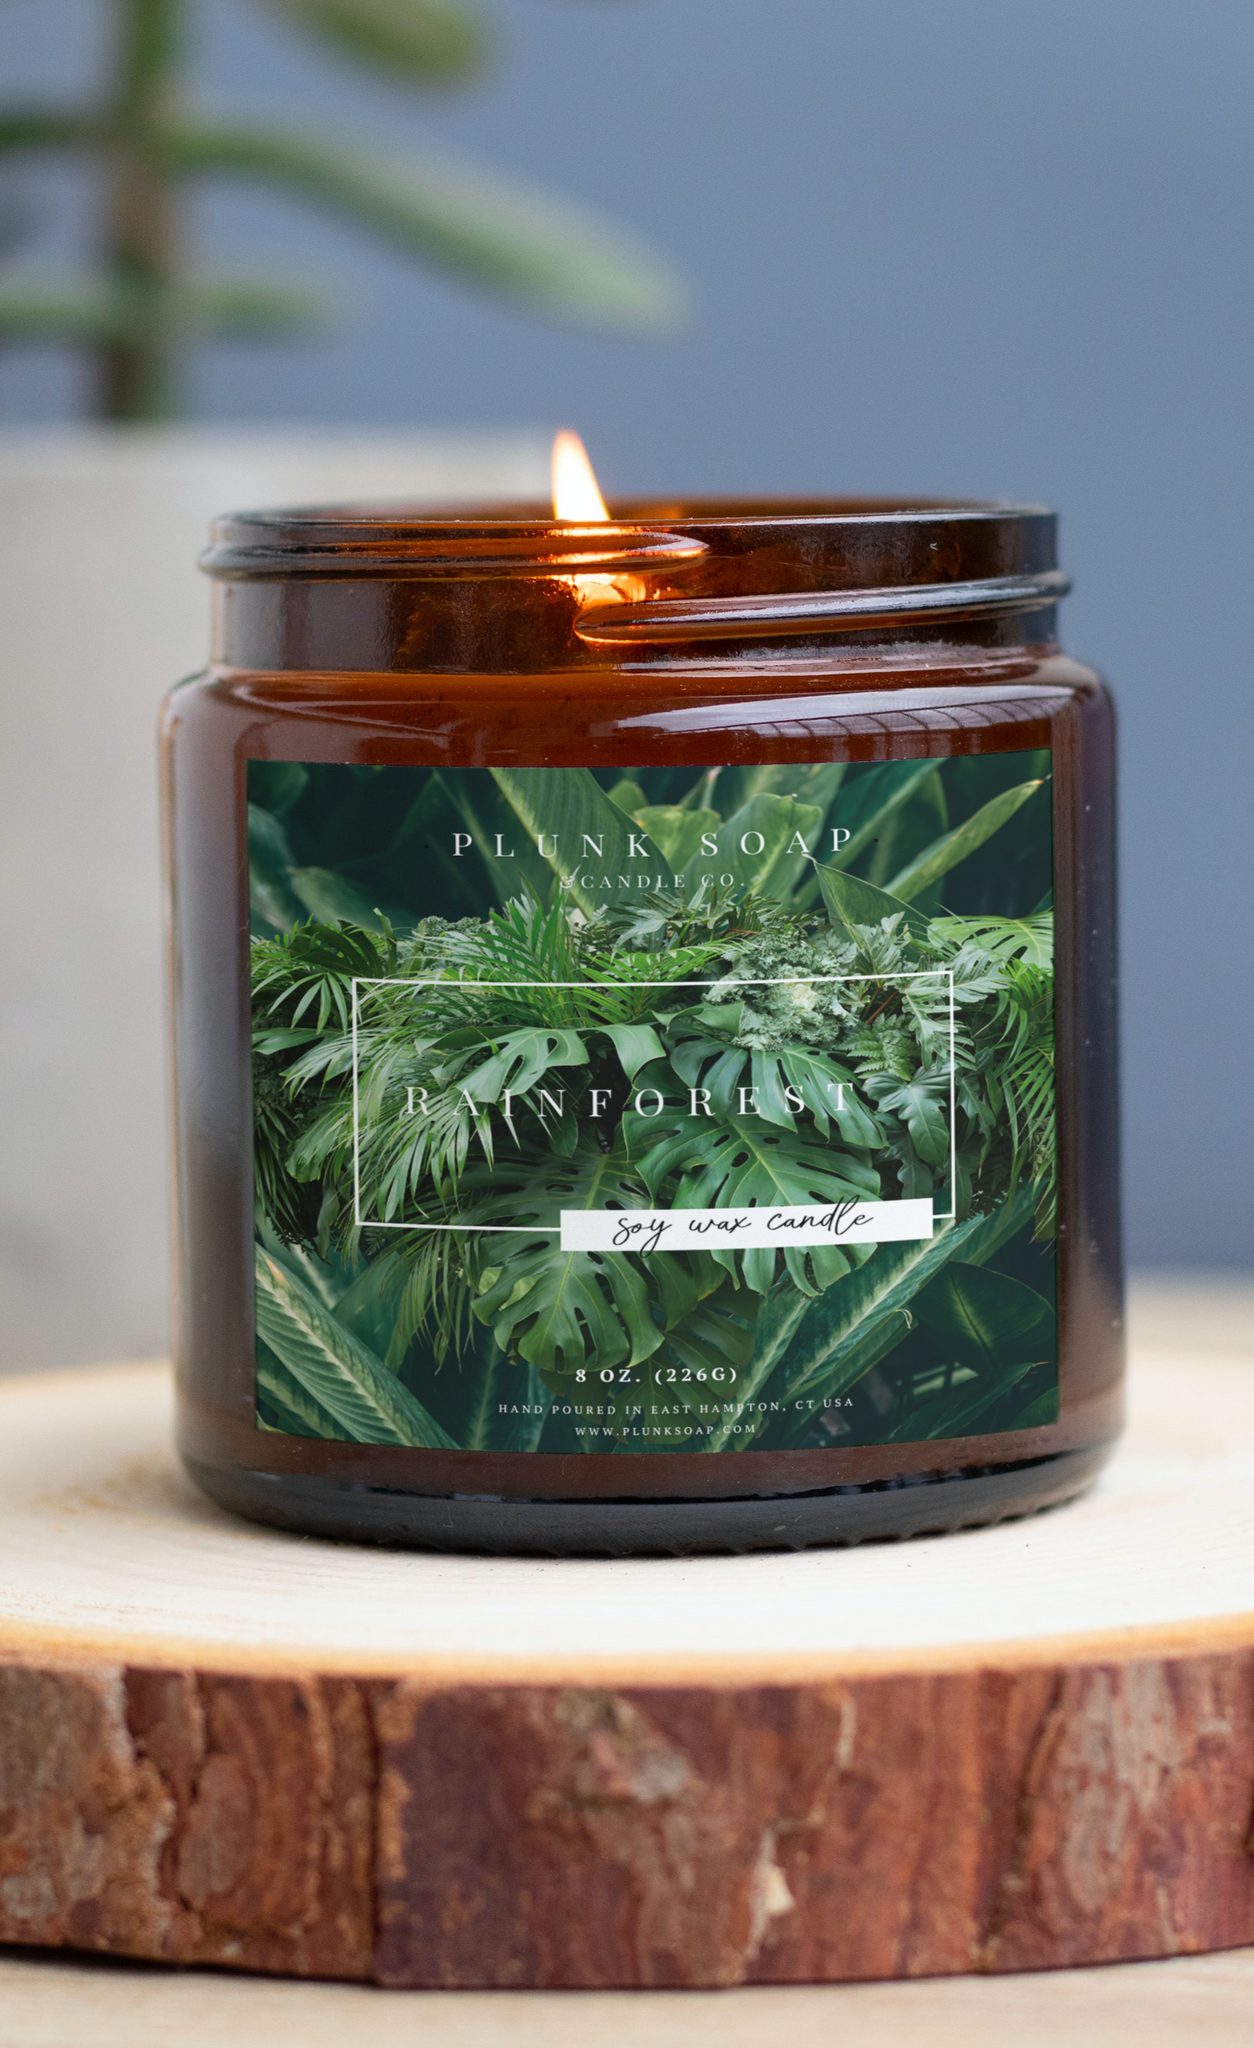 Rainforest scented soy candle